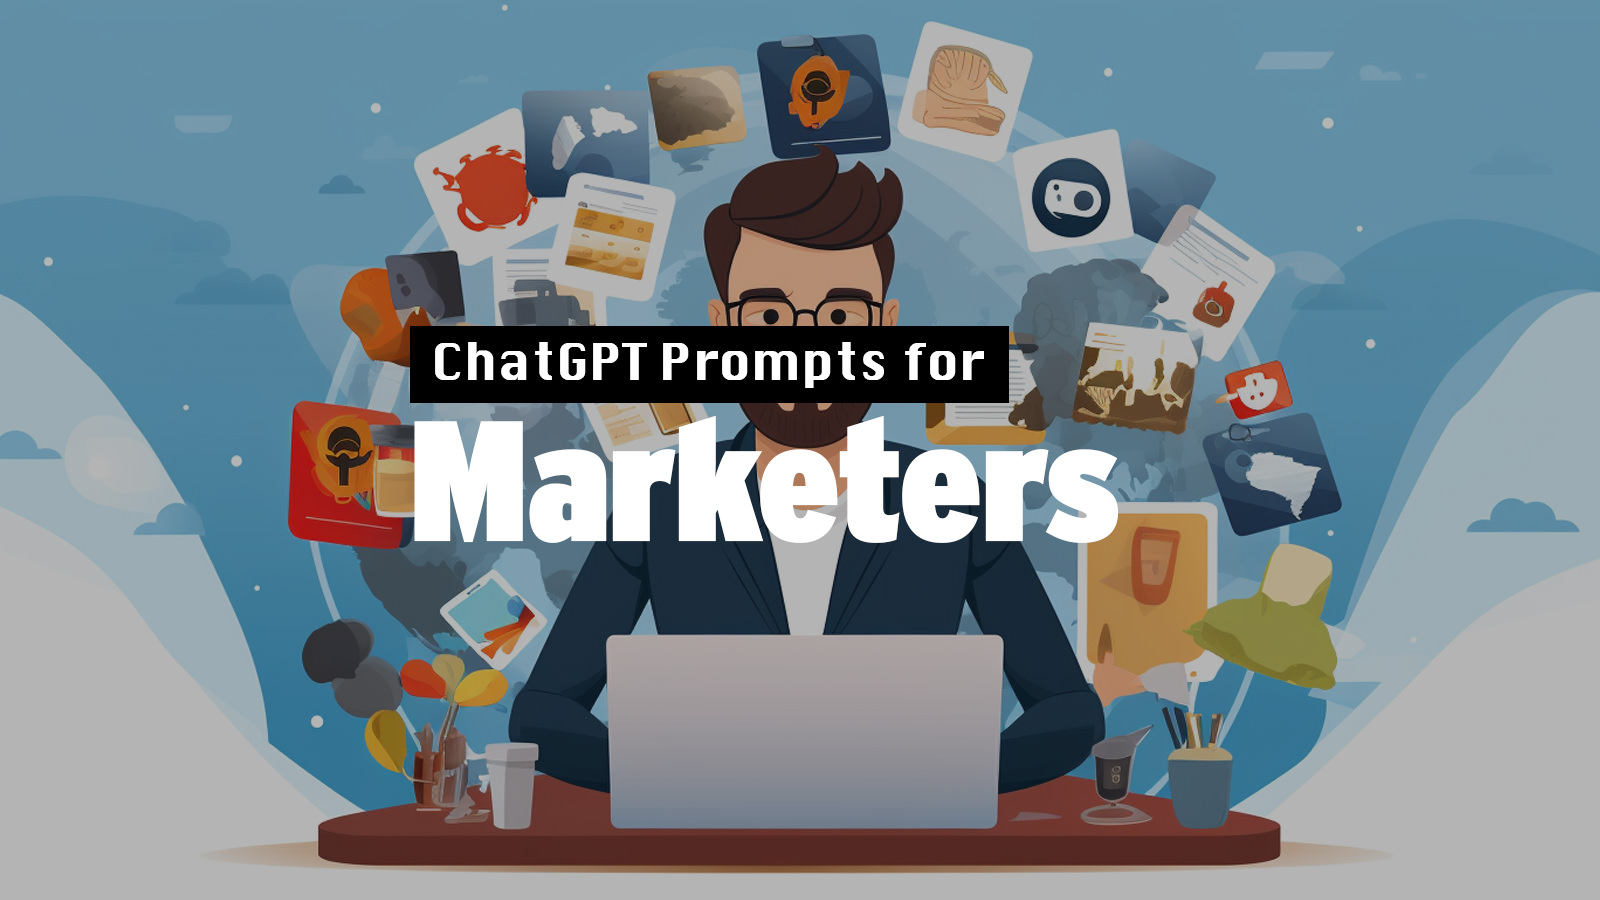 Chatgpt Prompts for Marketers